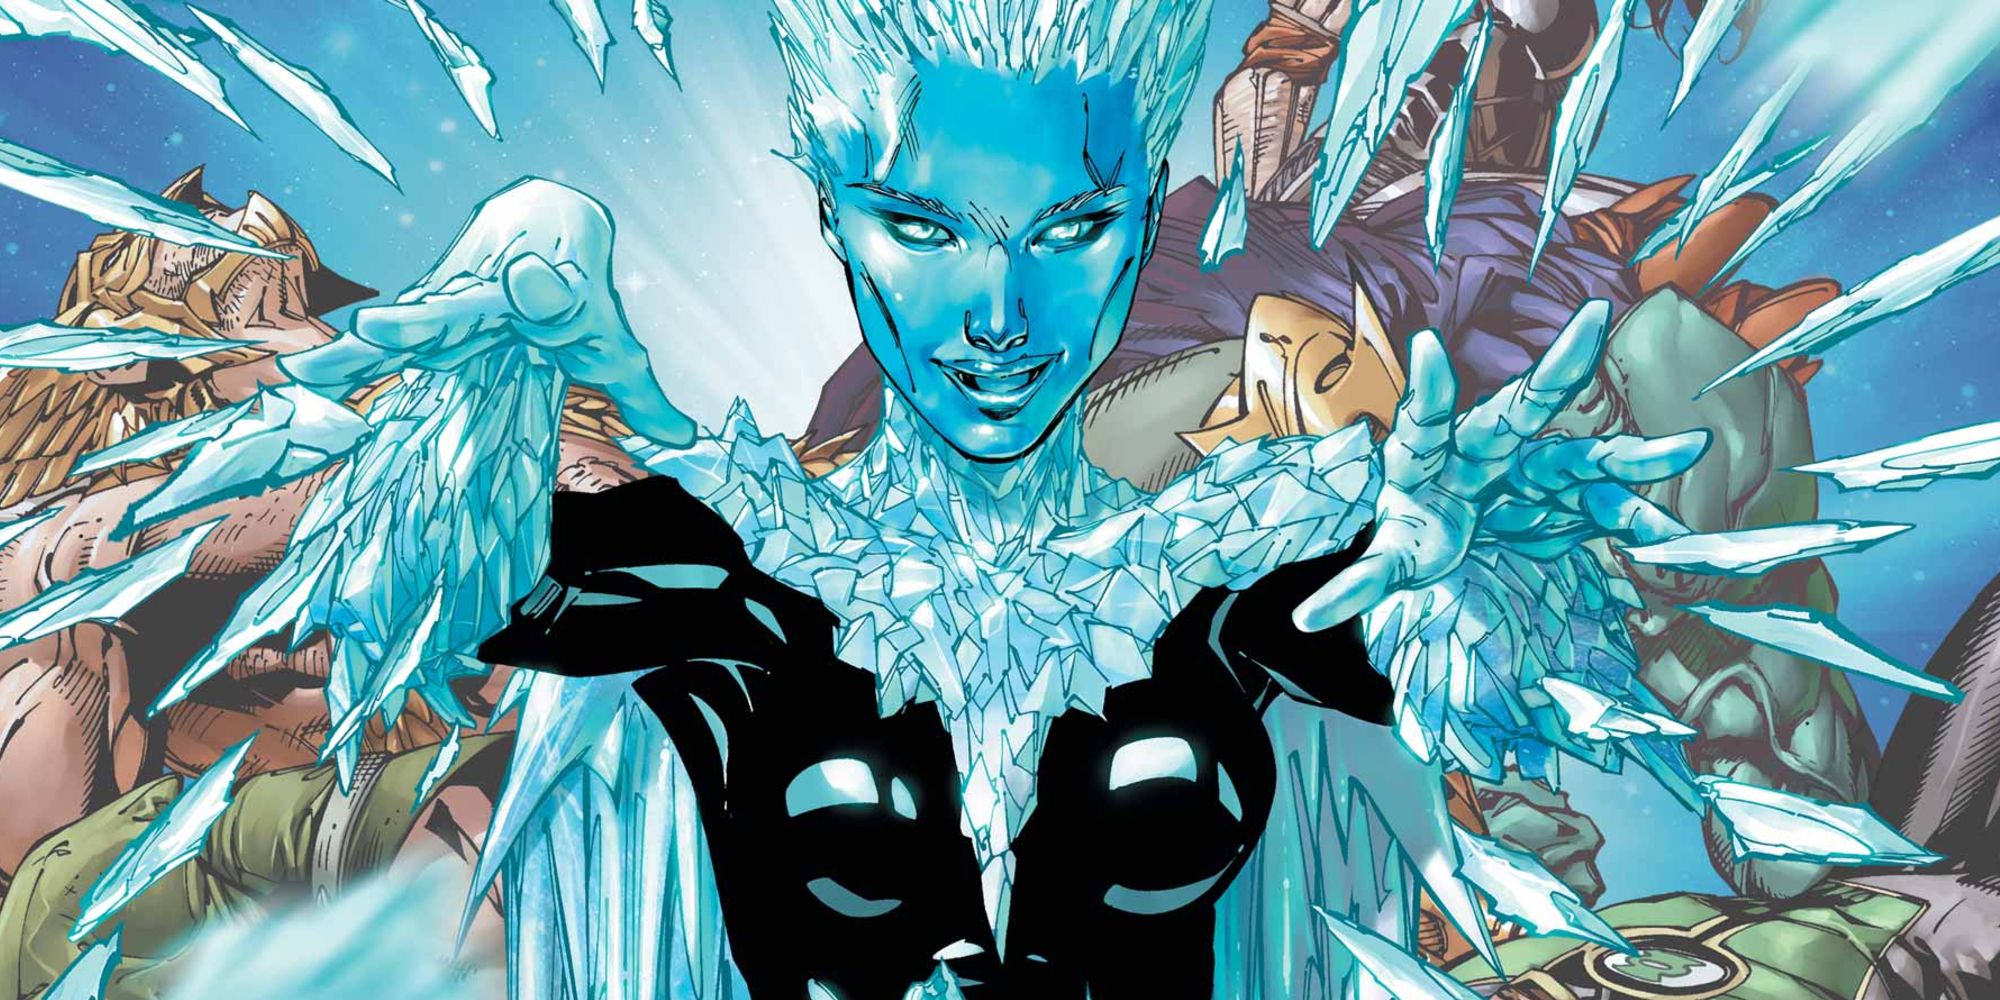 Killer Frost using her powers and smiling in DC Comics.